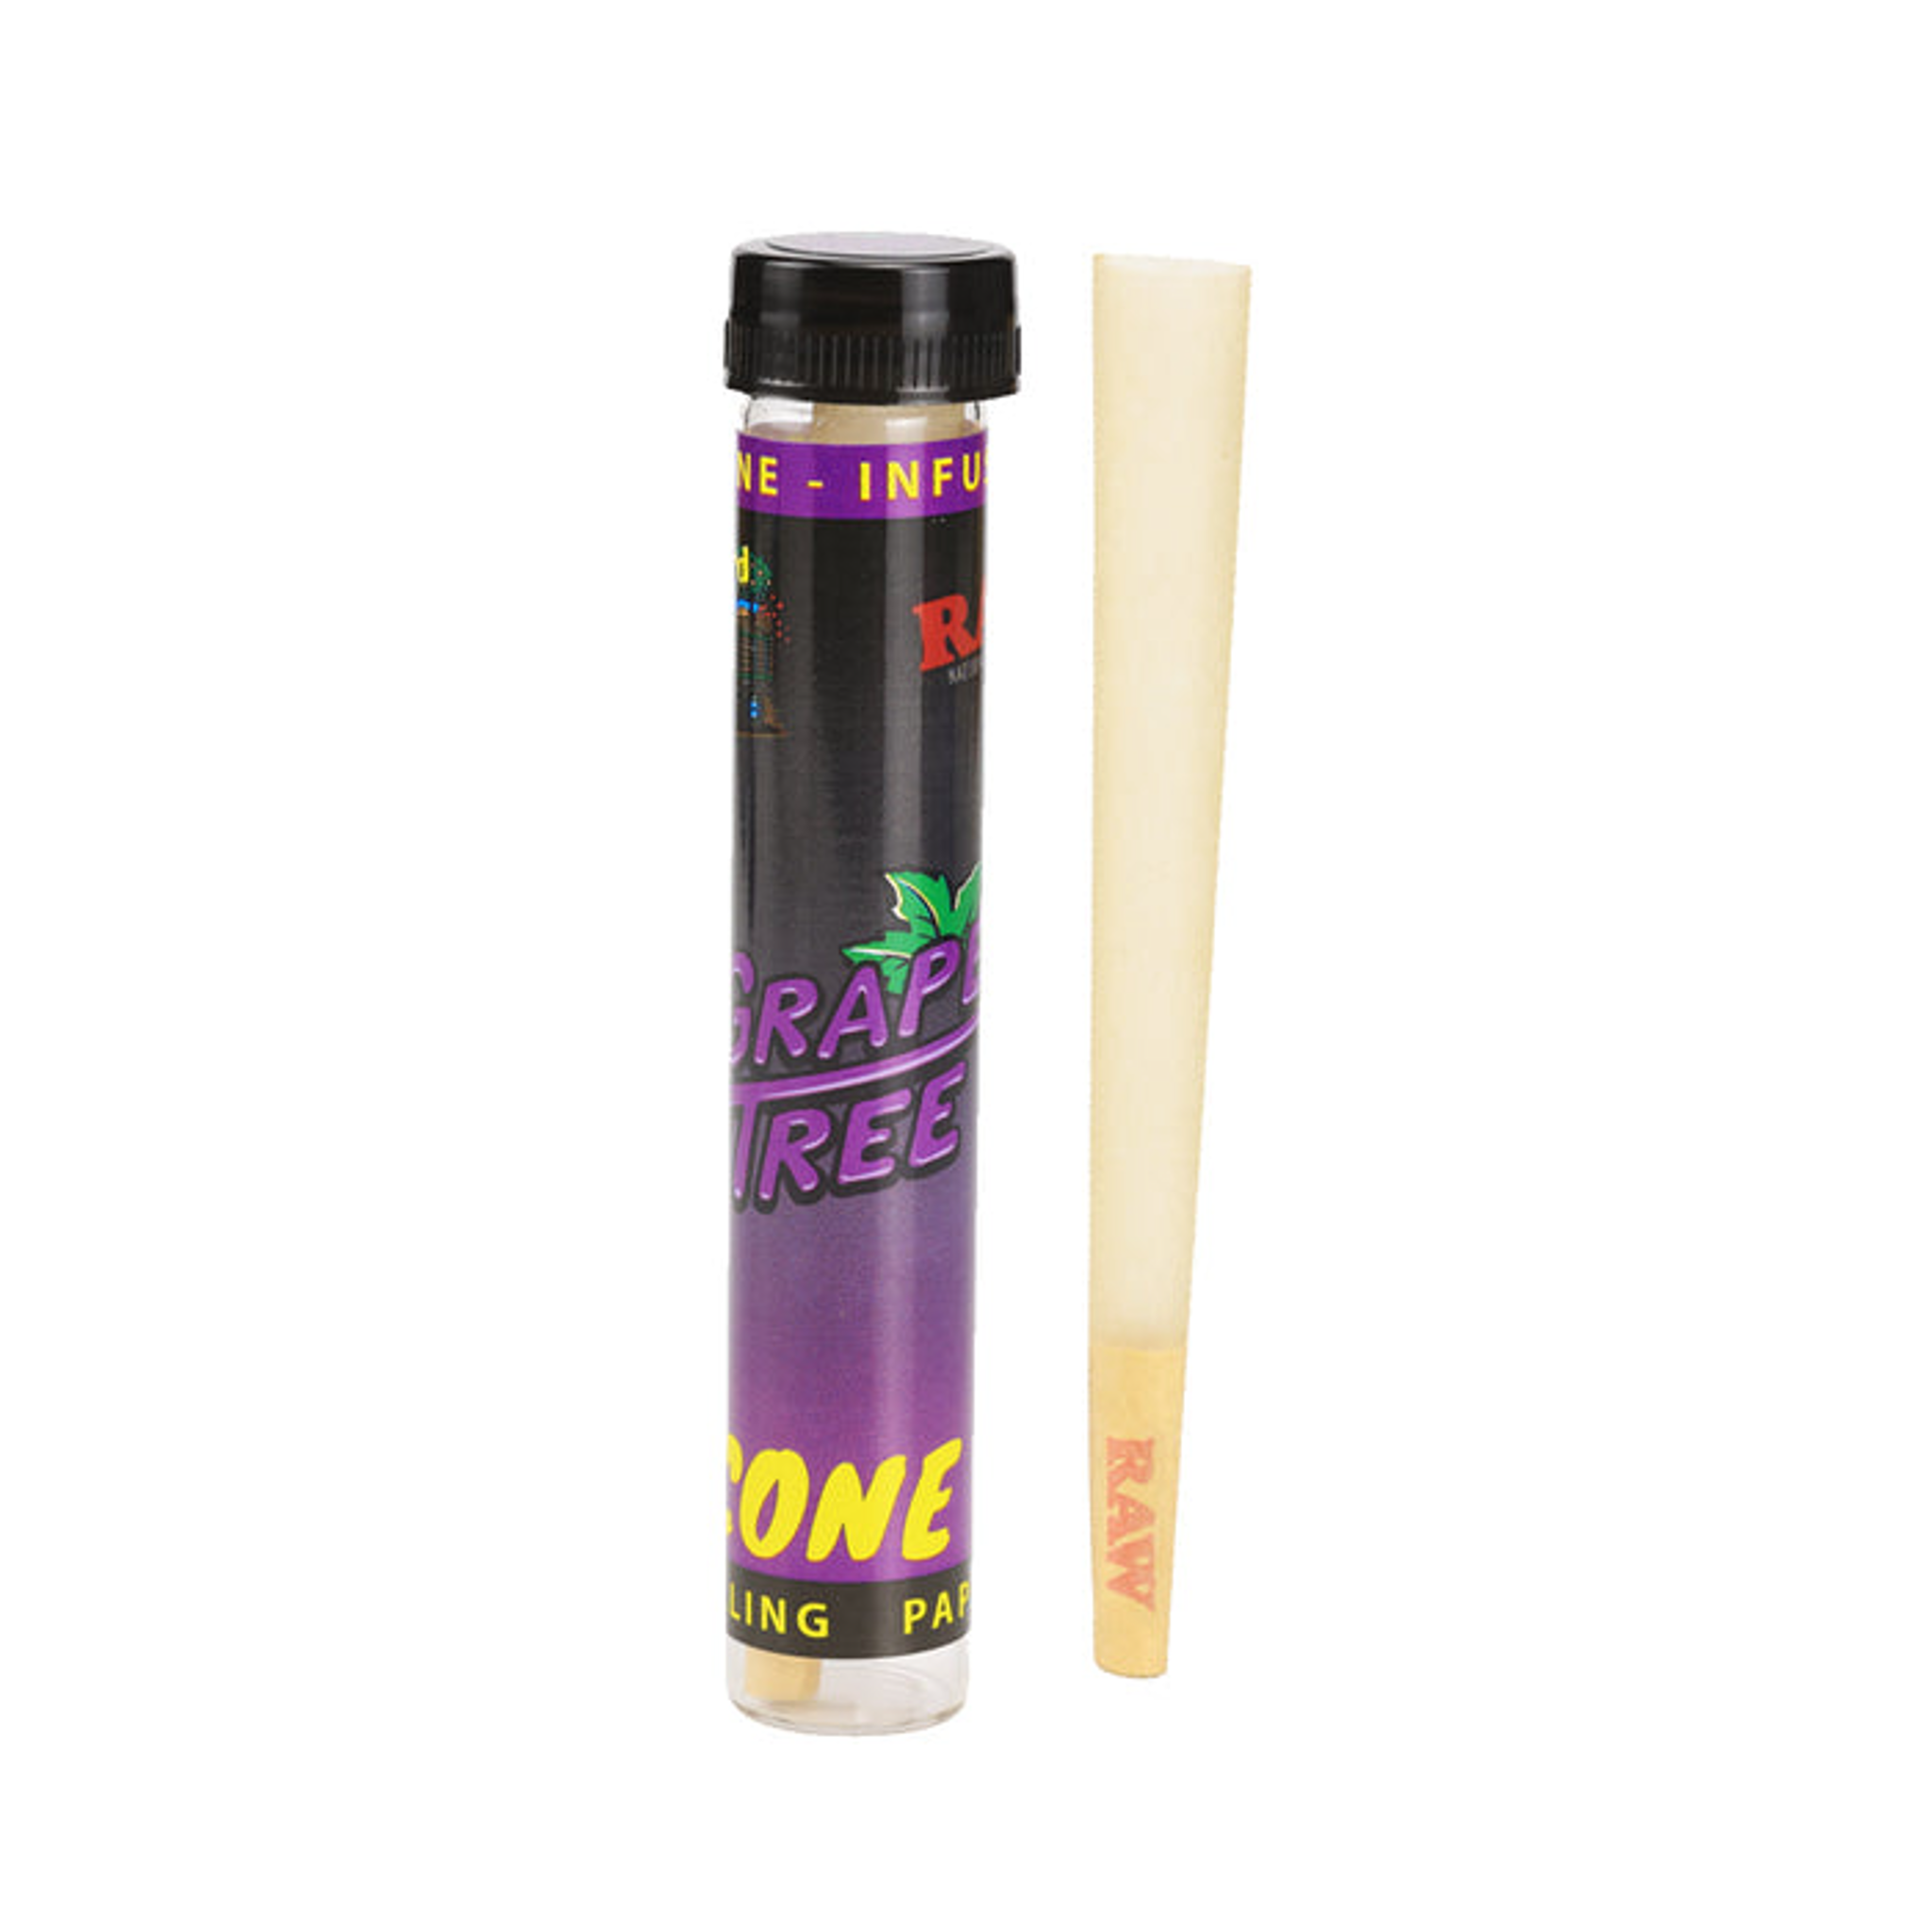 RAW x Orchard Tree Terpene Infused Pre-Rolled Cone - King Size